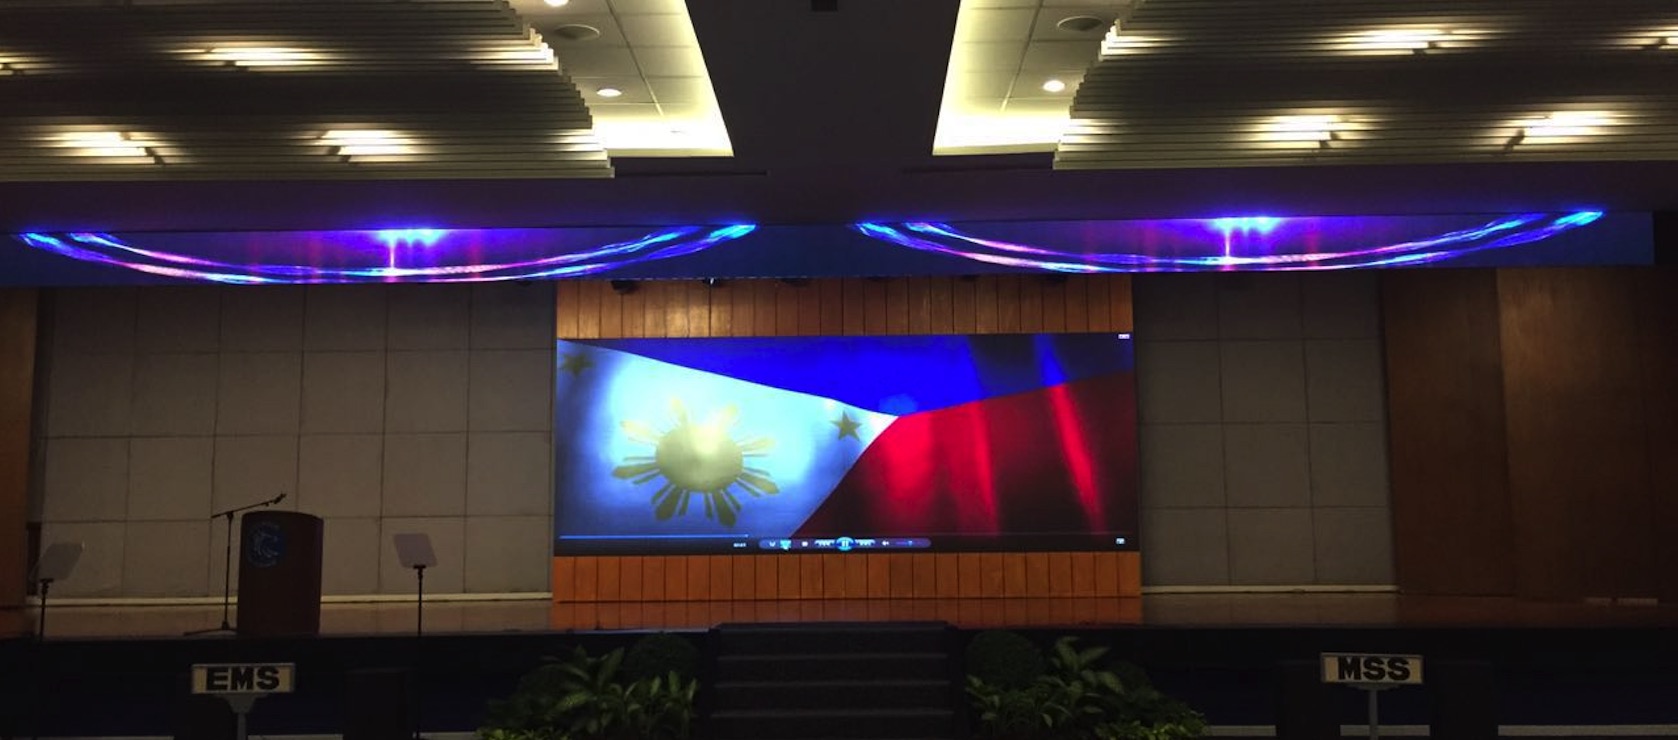 Newest installation P3.91 LED display at Phillipines